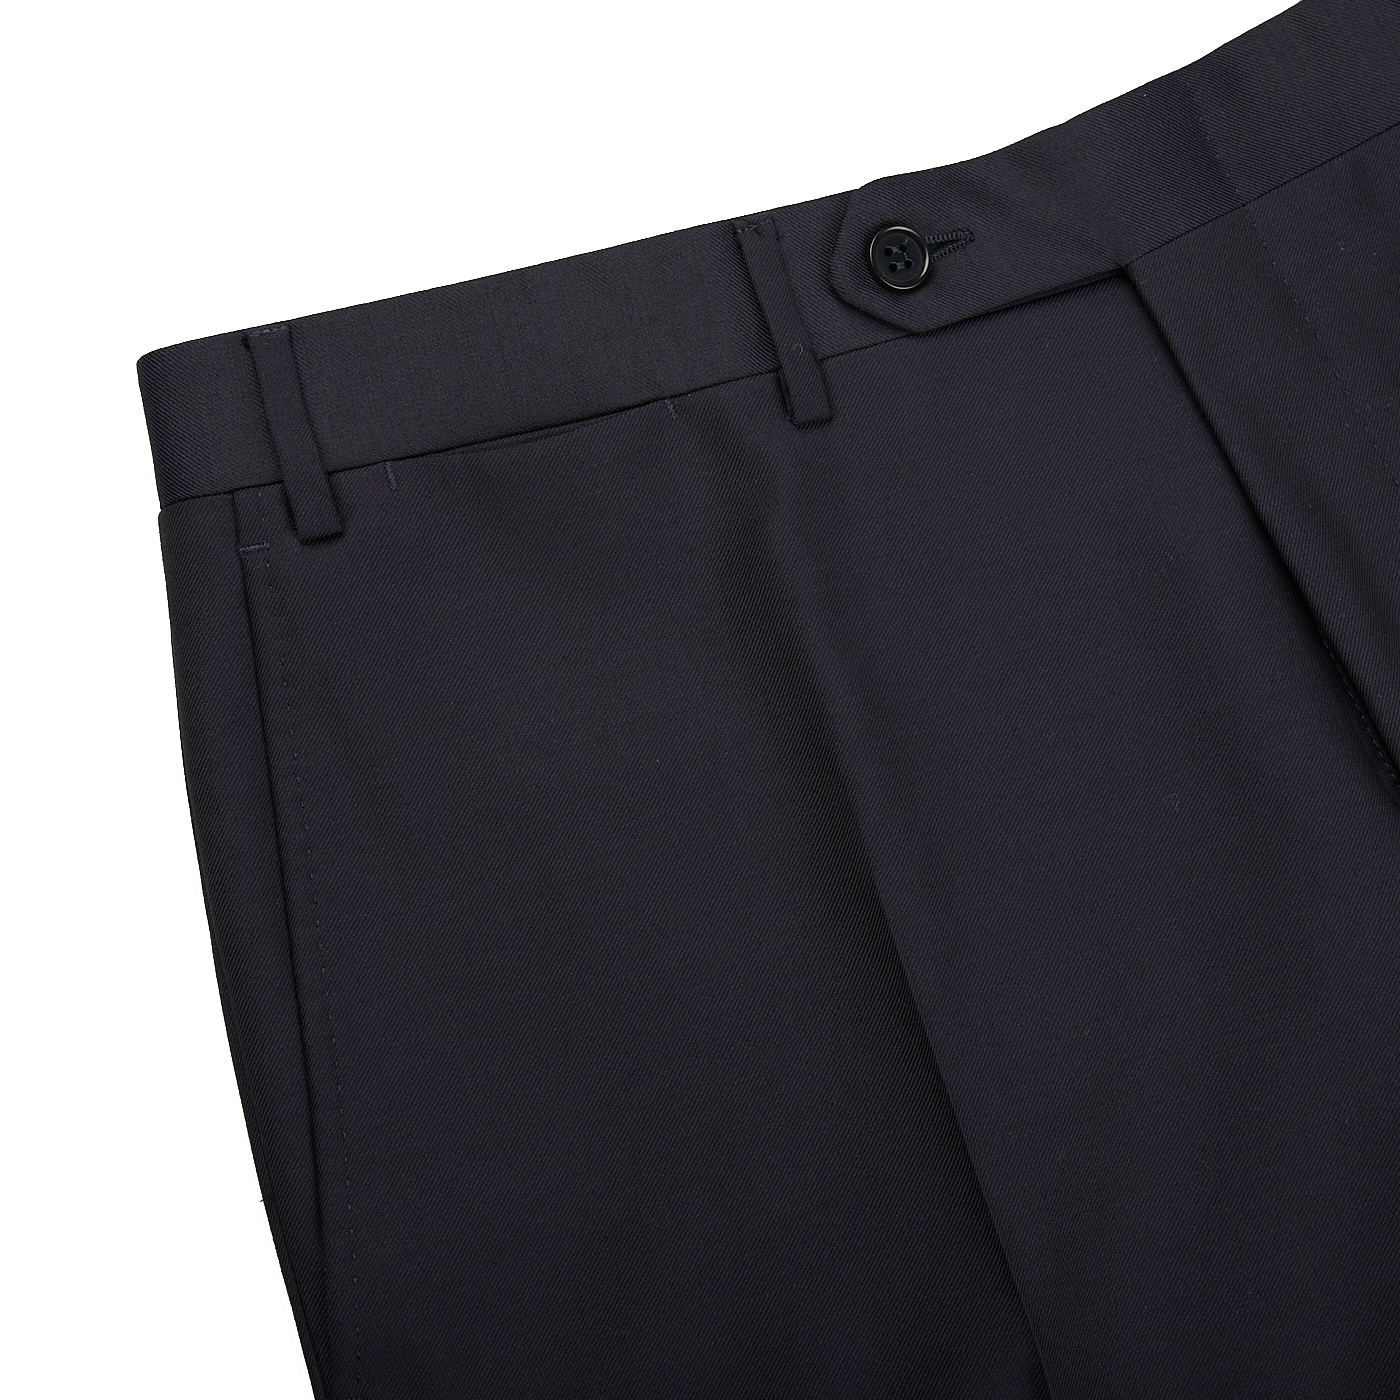 A close up of Canali navy blue wool twill formal trousers.